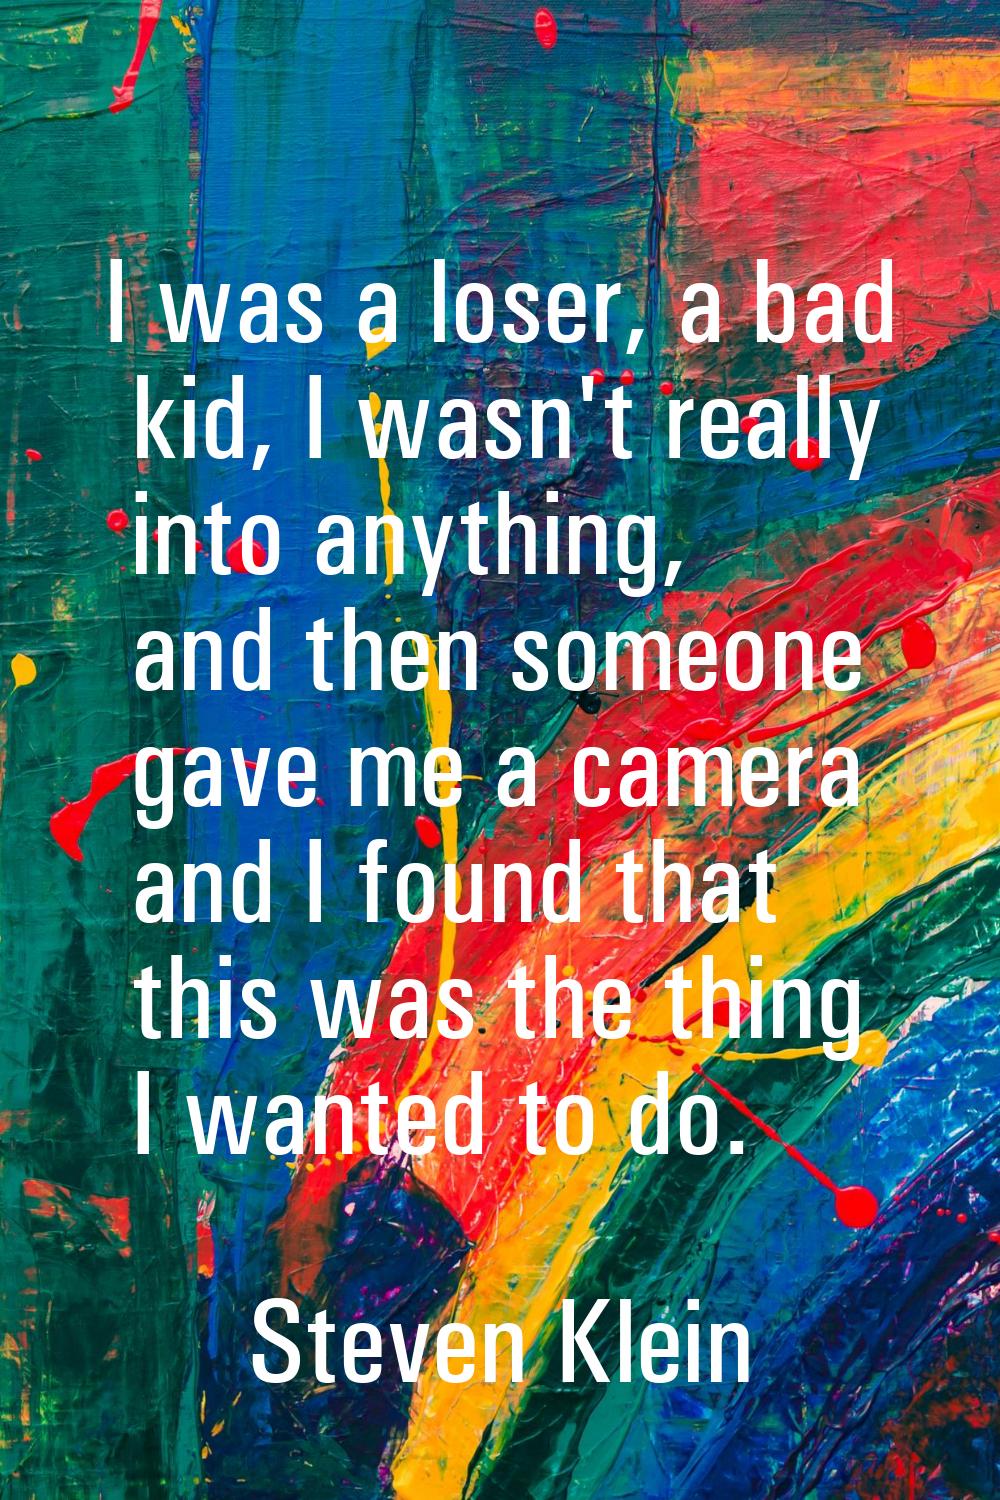 I was a loser, a bad kid, I wasn't really into anything, and then someone gave me a camera and I fo